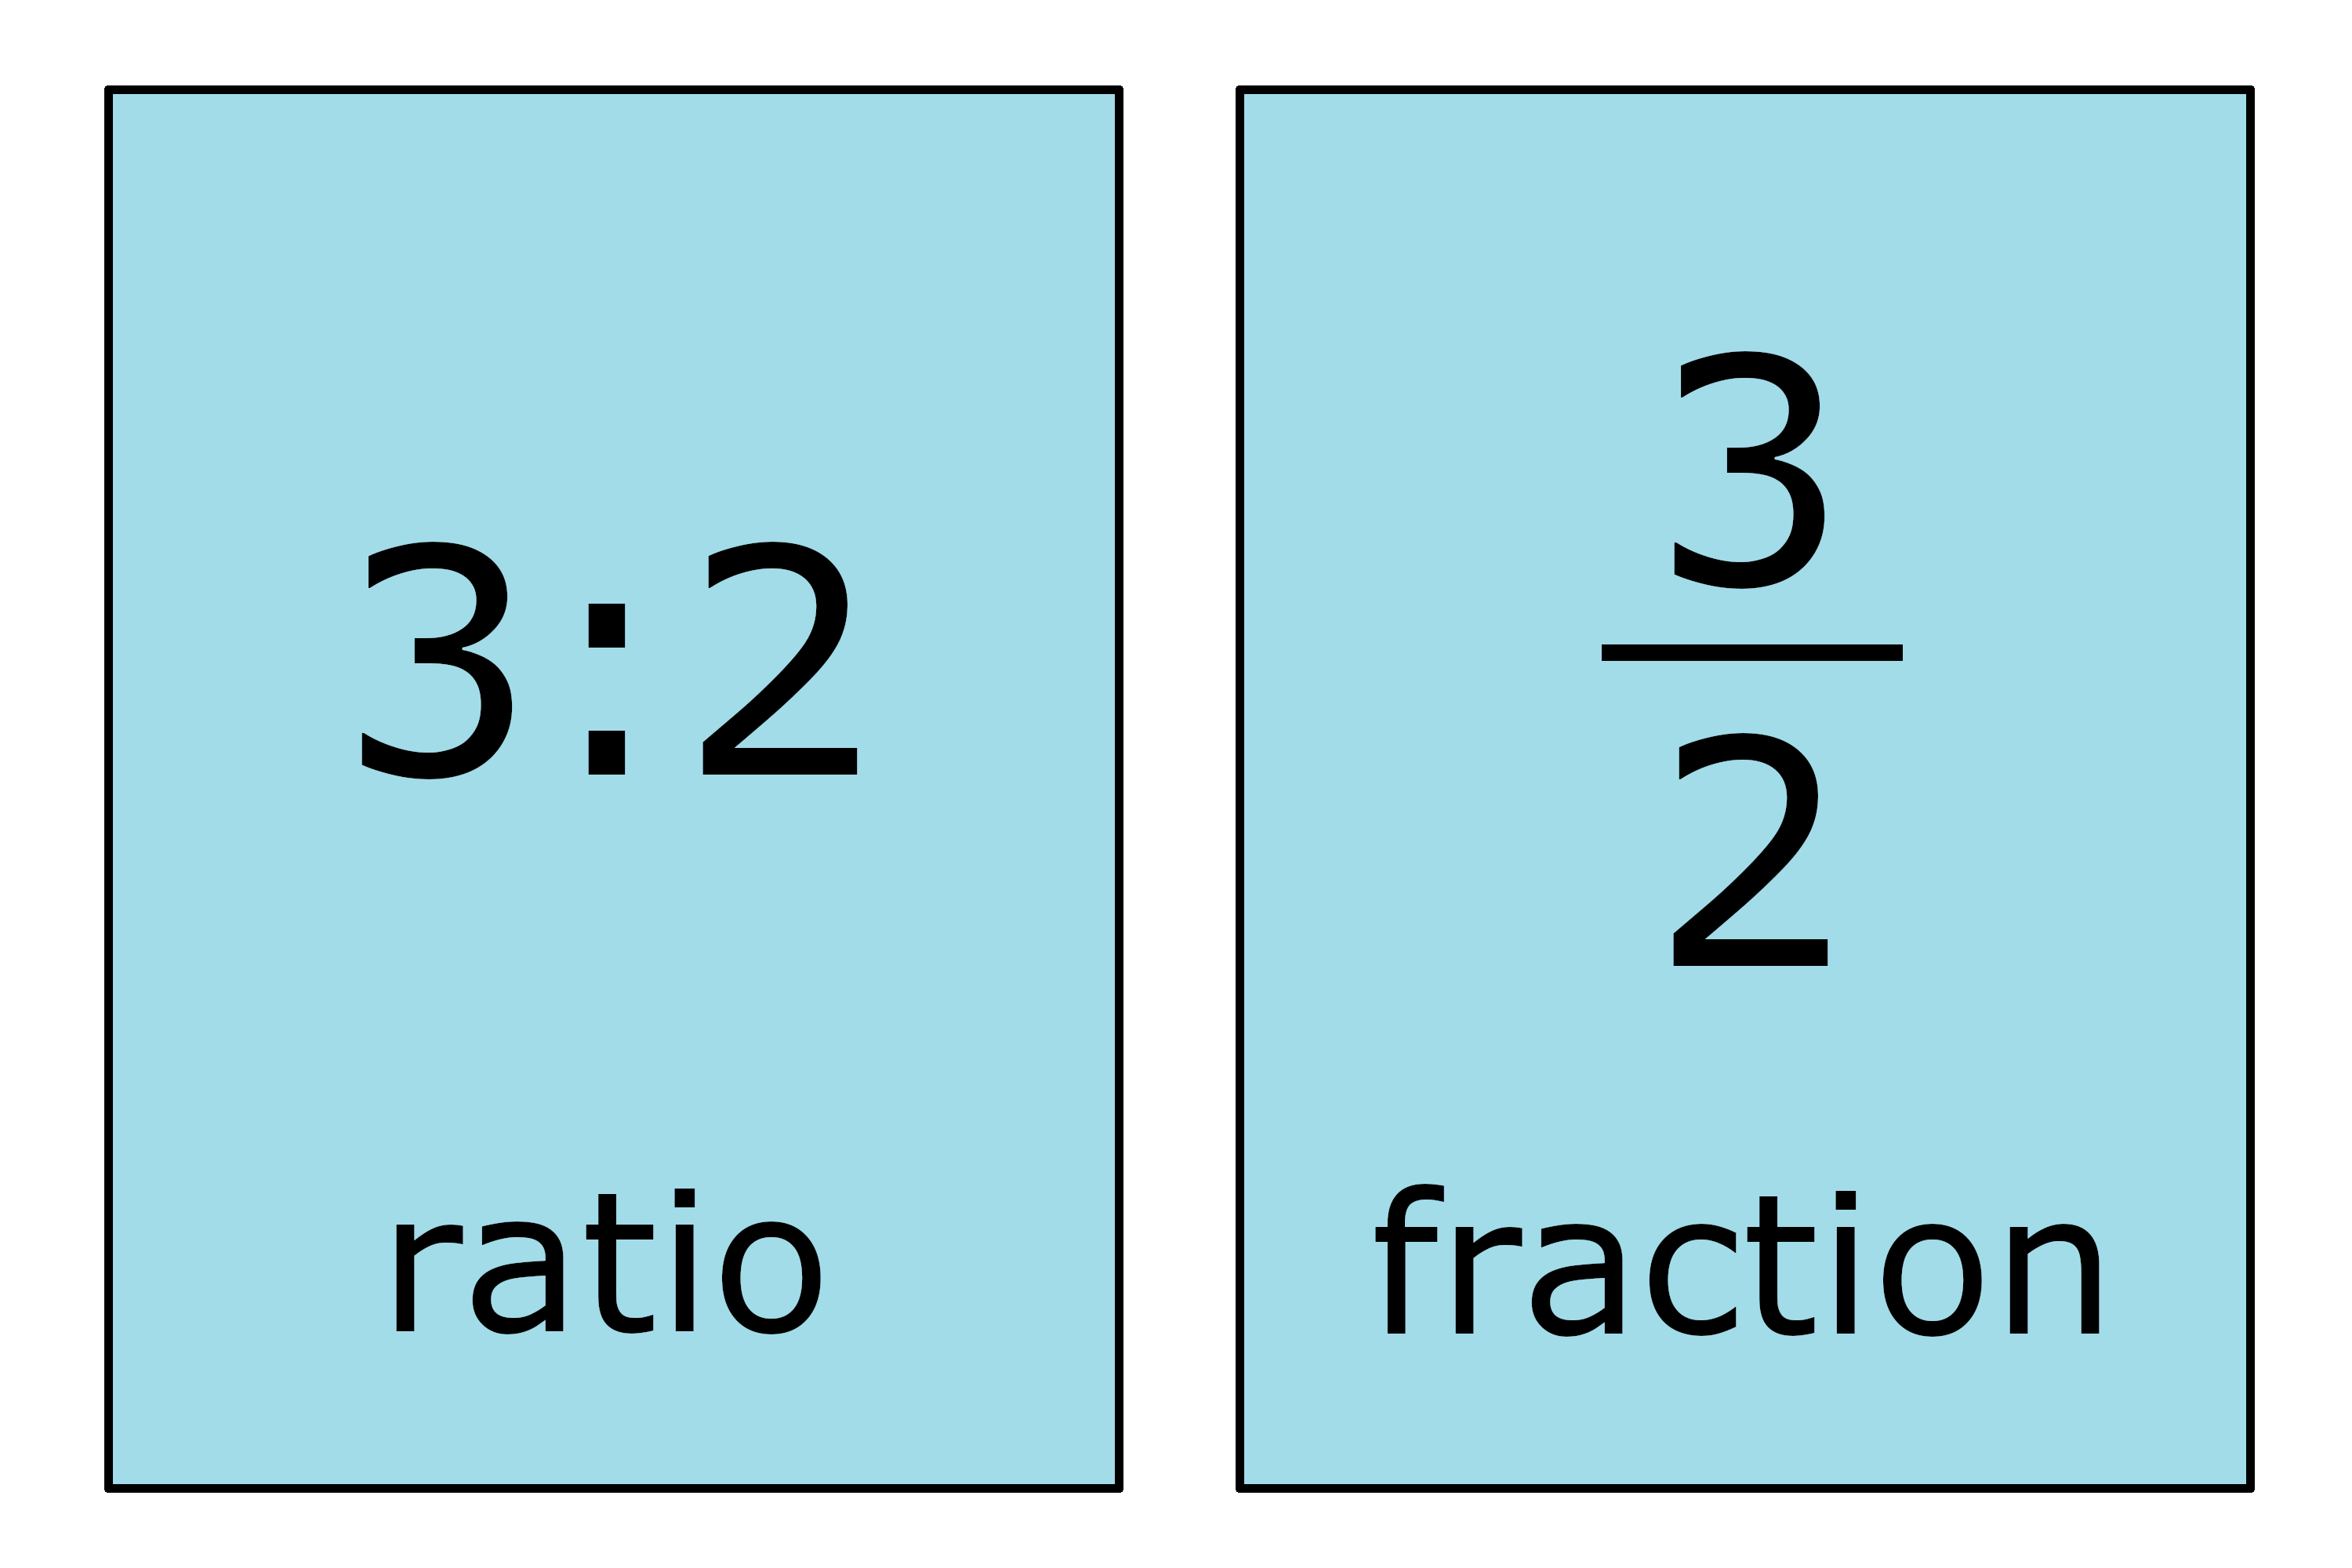 image showing the ratio 3:2 being equal to the fraction 3/2